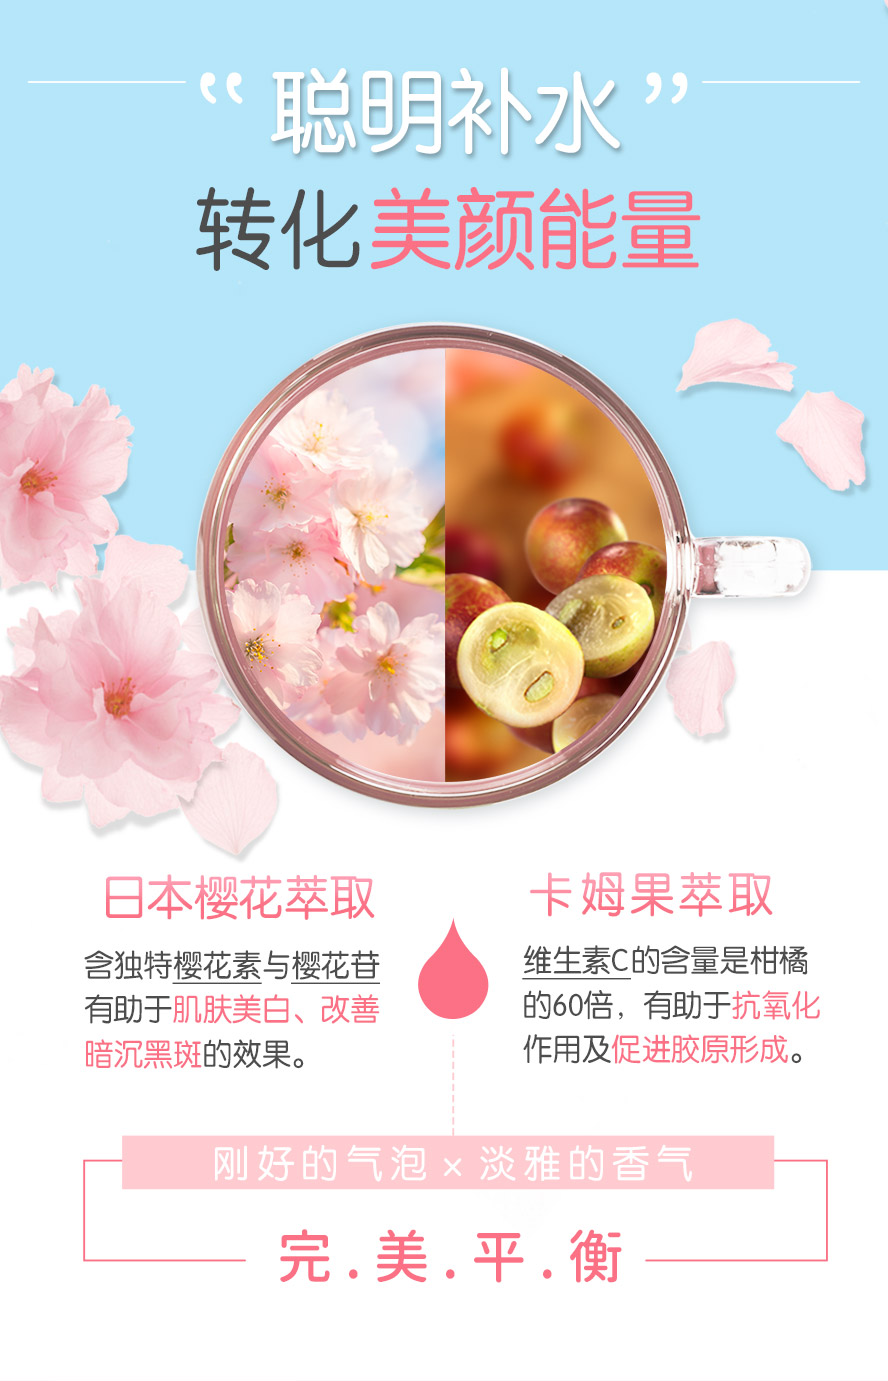 BHKs beauty drink contains sakura extract that promotes collagen formation, and camu camu berry extract that has richest source of Vitamin C.